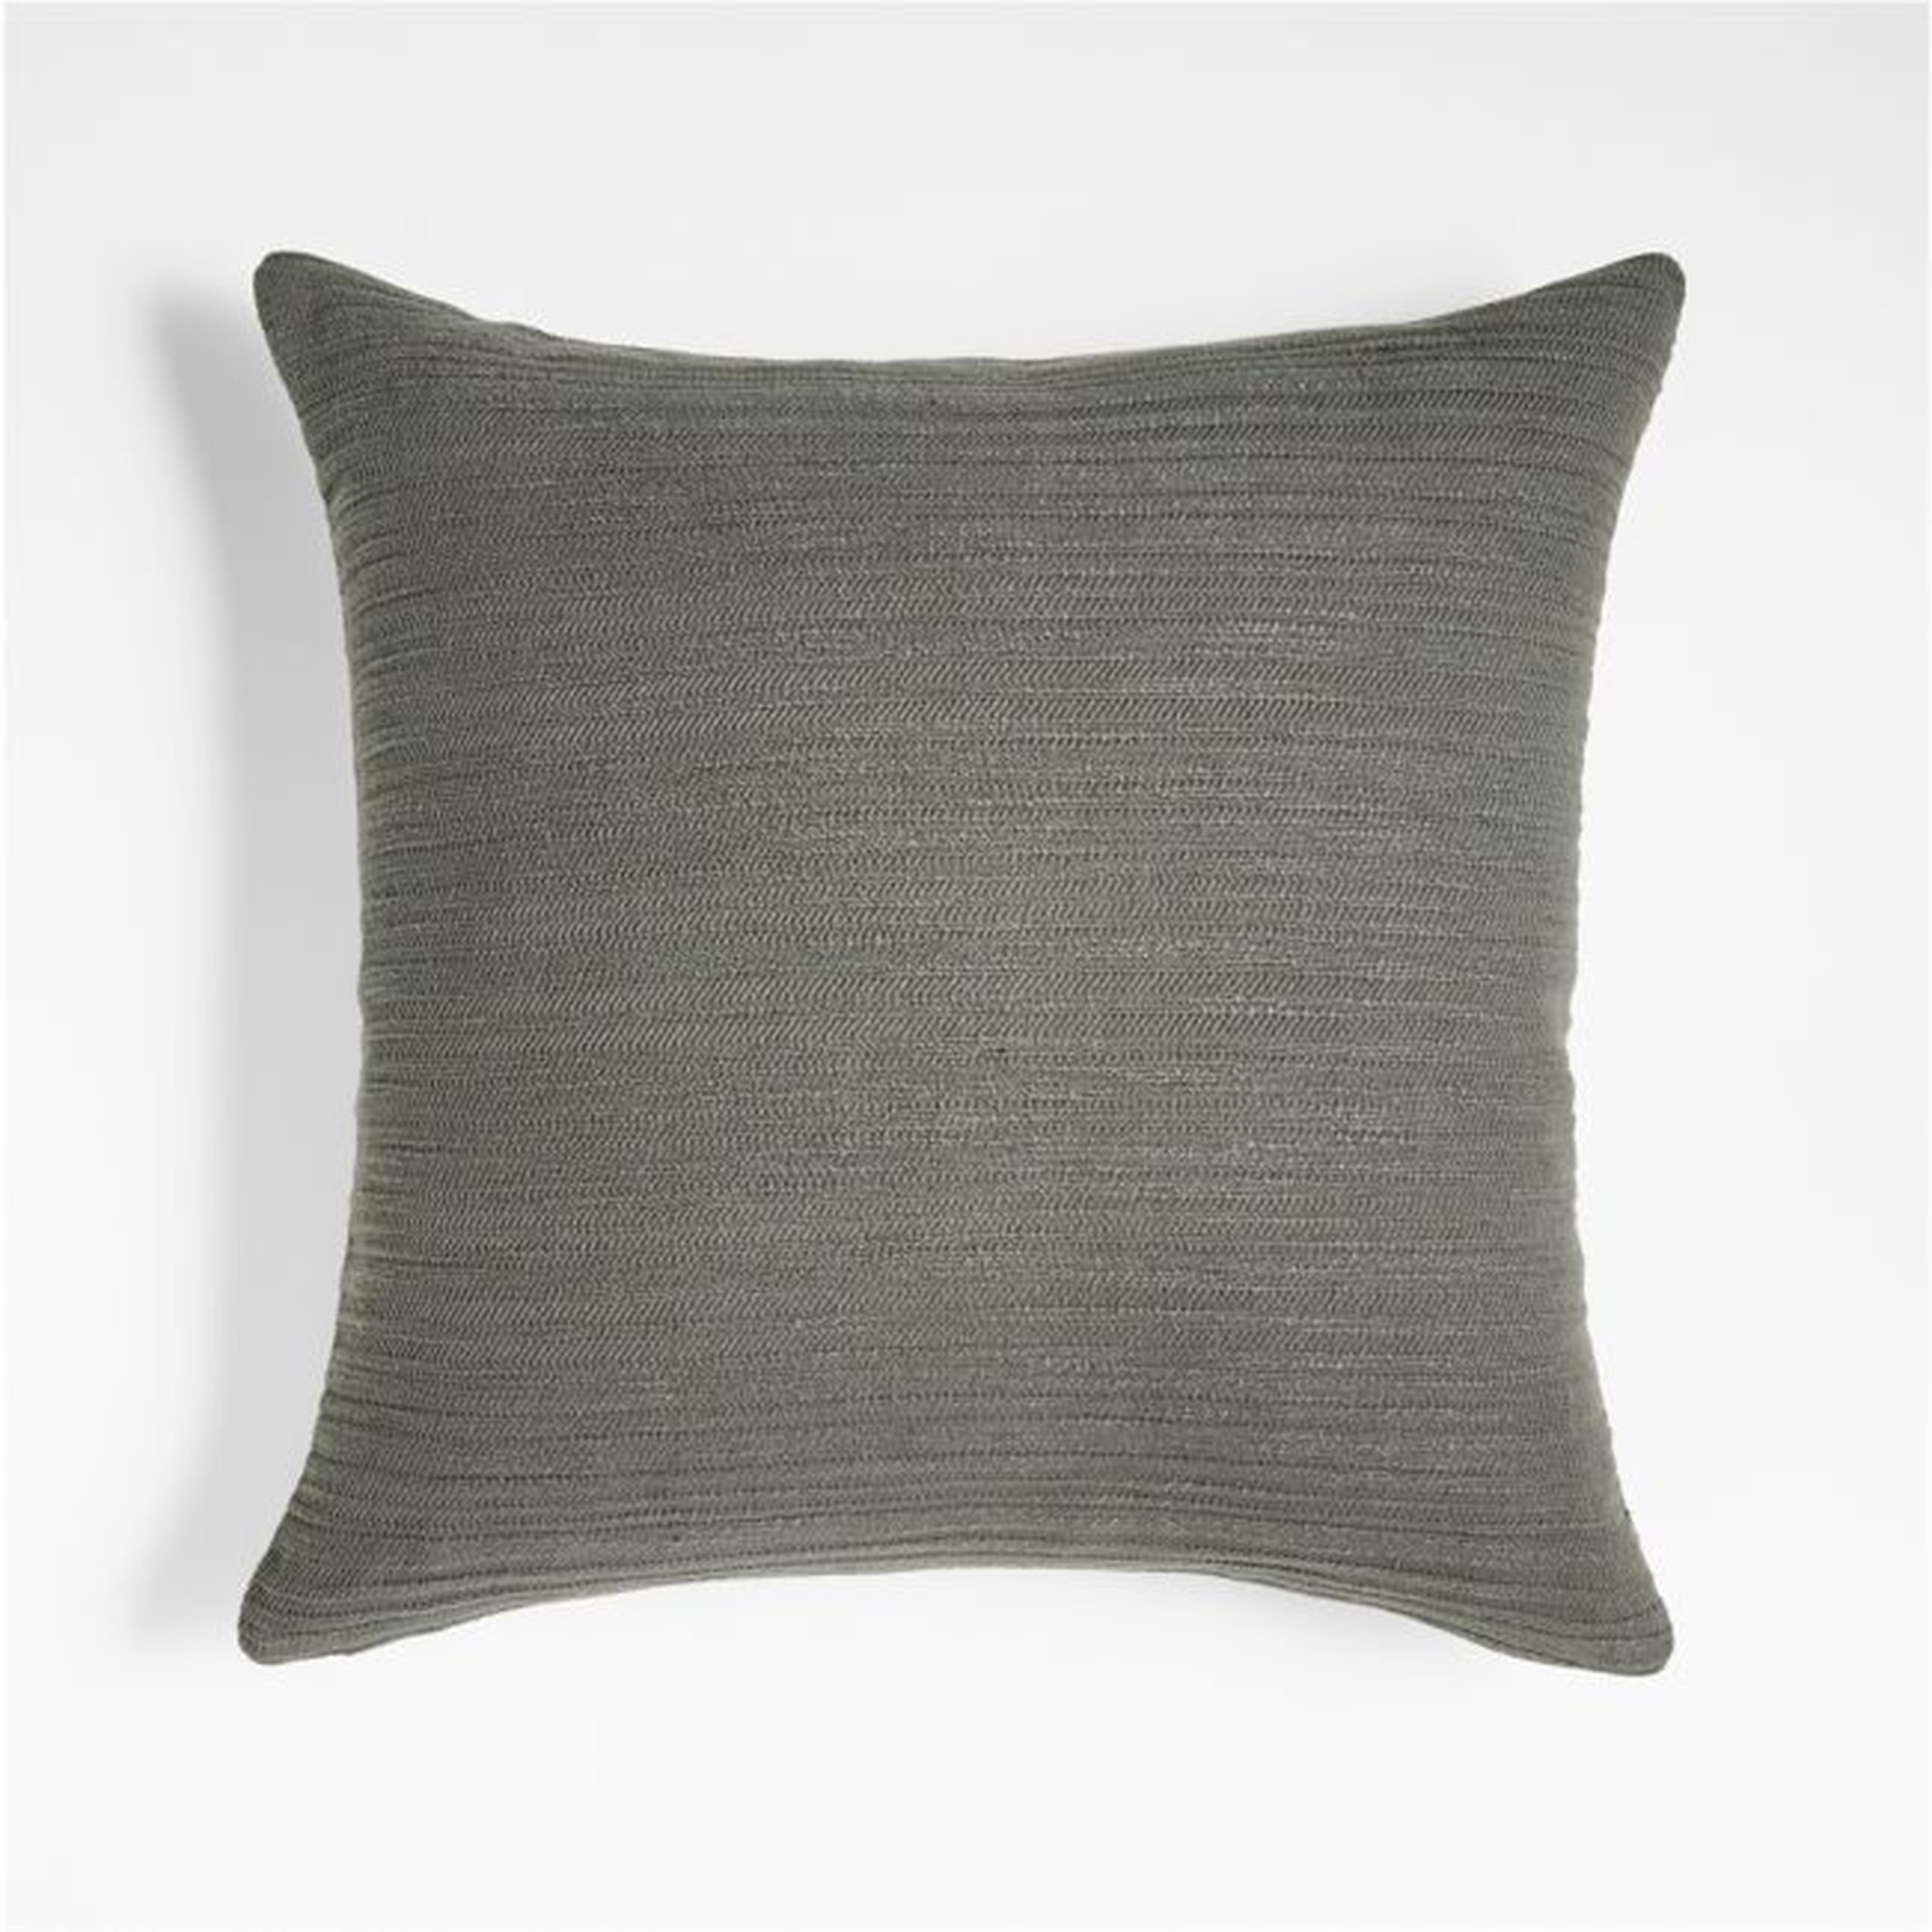 Correto 20" Dark Grey Textured Pillow Cover - Crate and Barrel